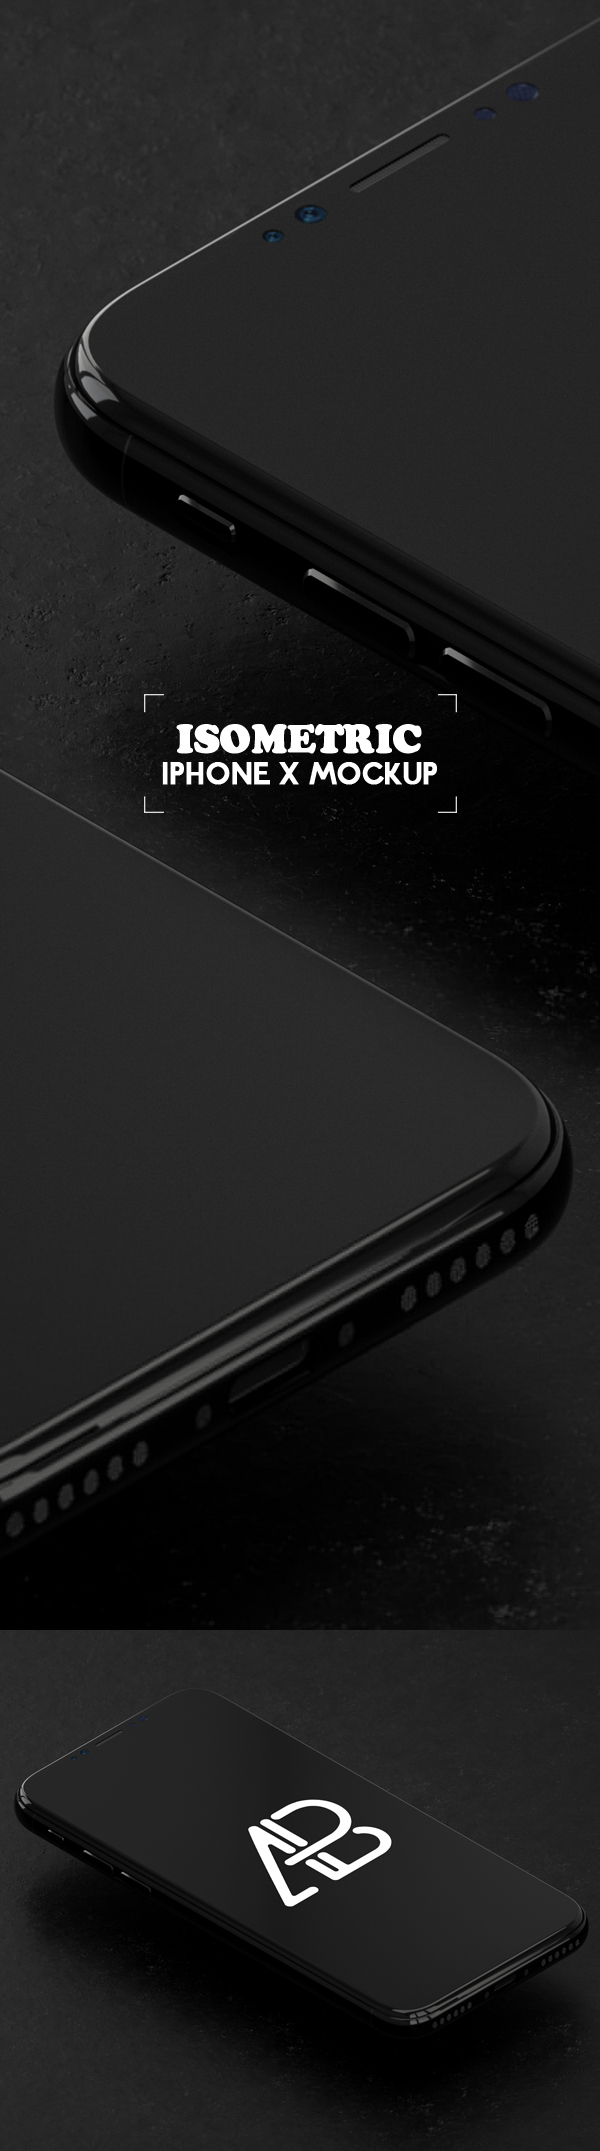 Free Download iPhone X PSD Mockups and Sketch - 20